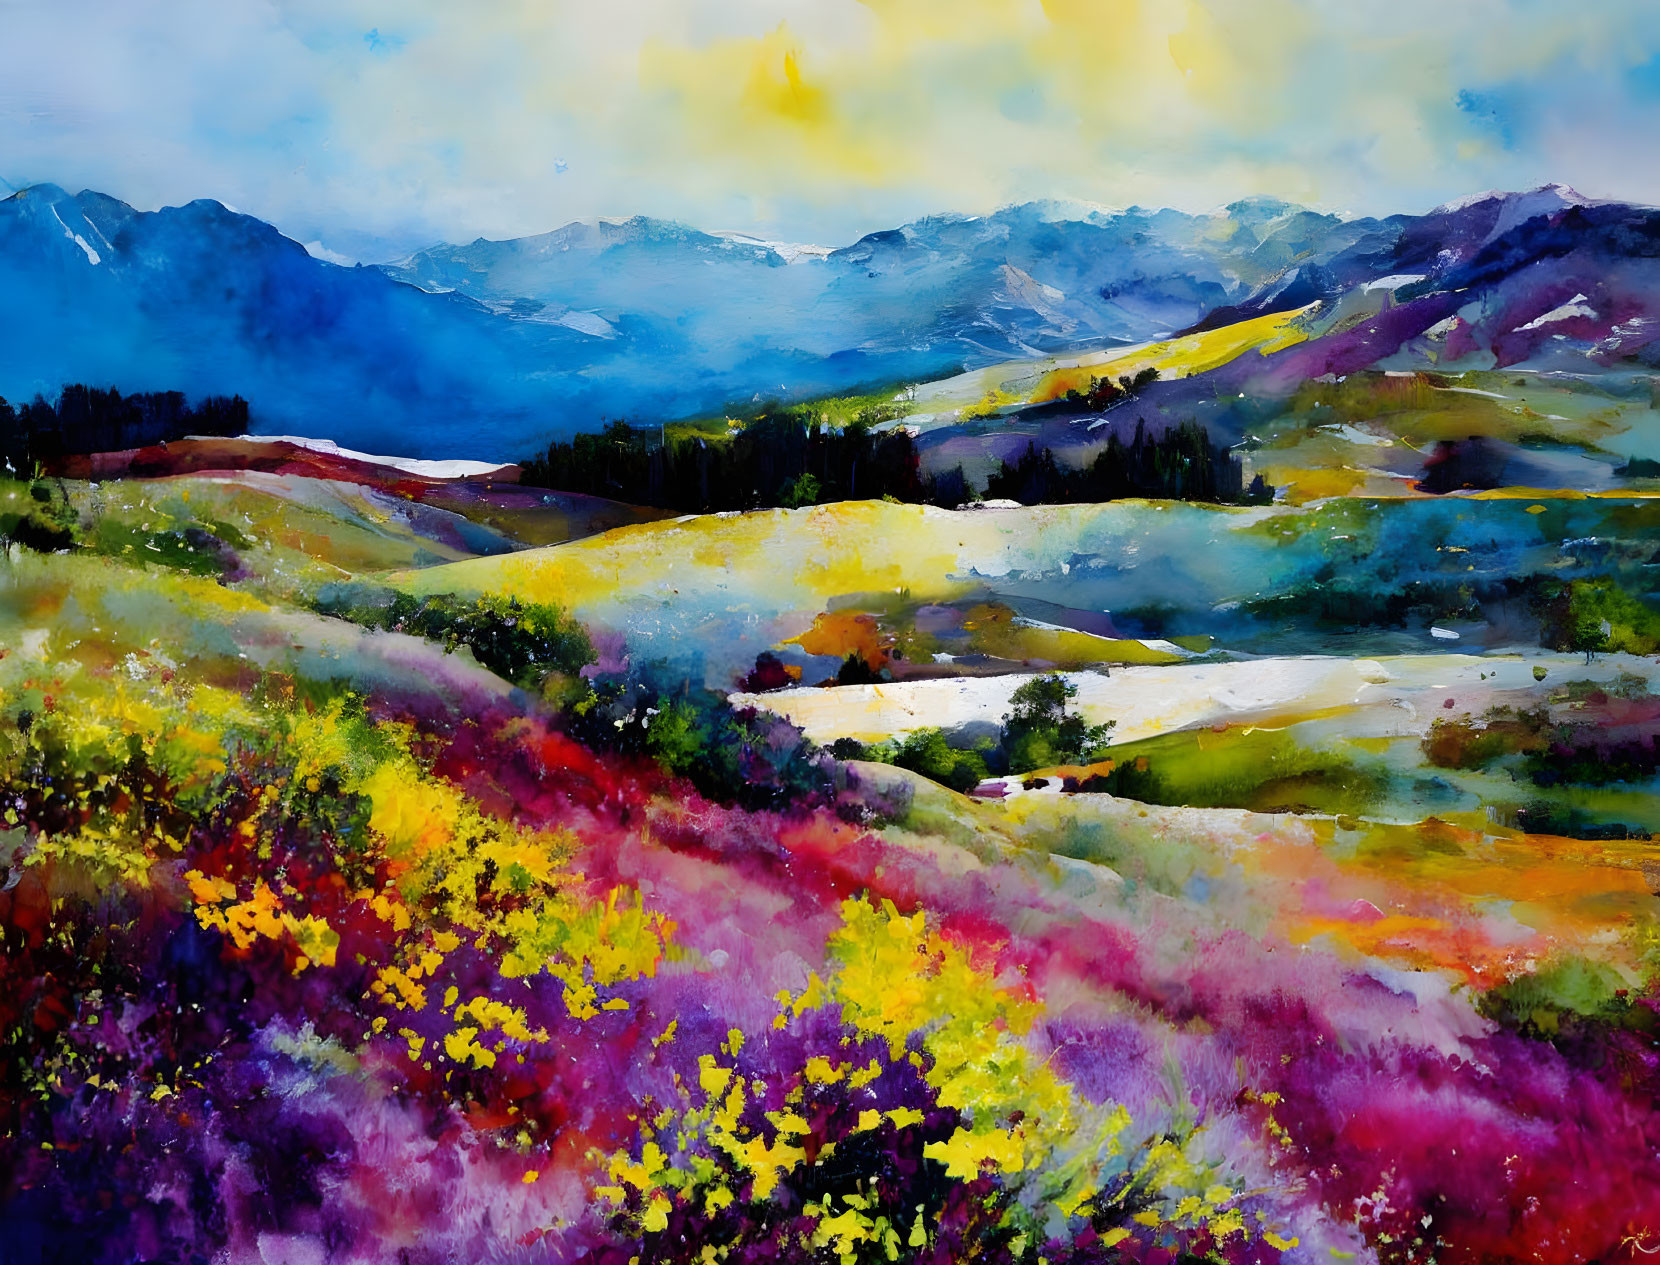 Colorful landscape painting with hills, wildflowers, lake, mountains, and yellow sky.